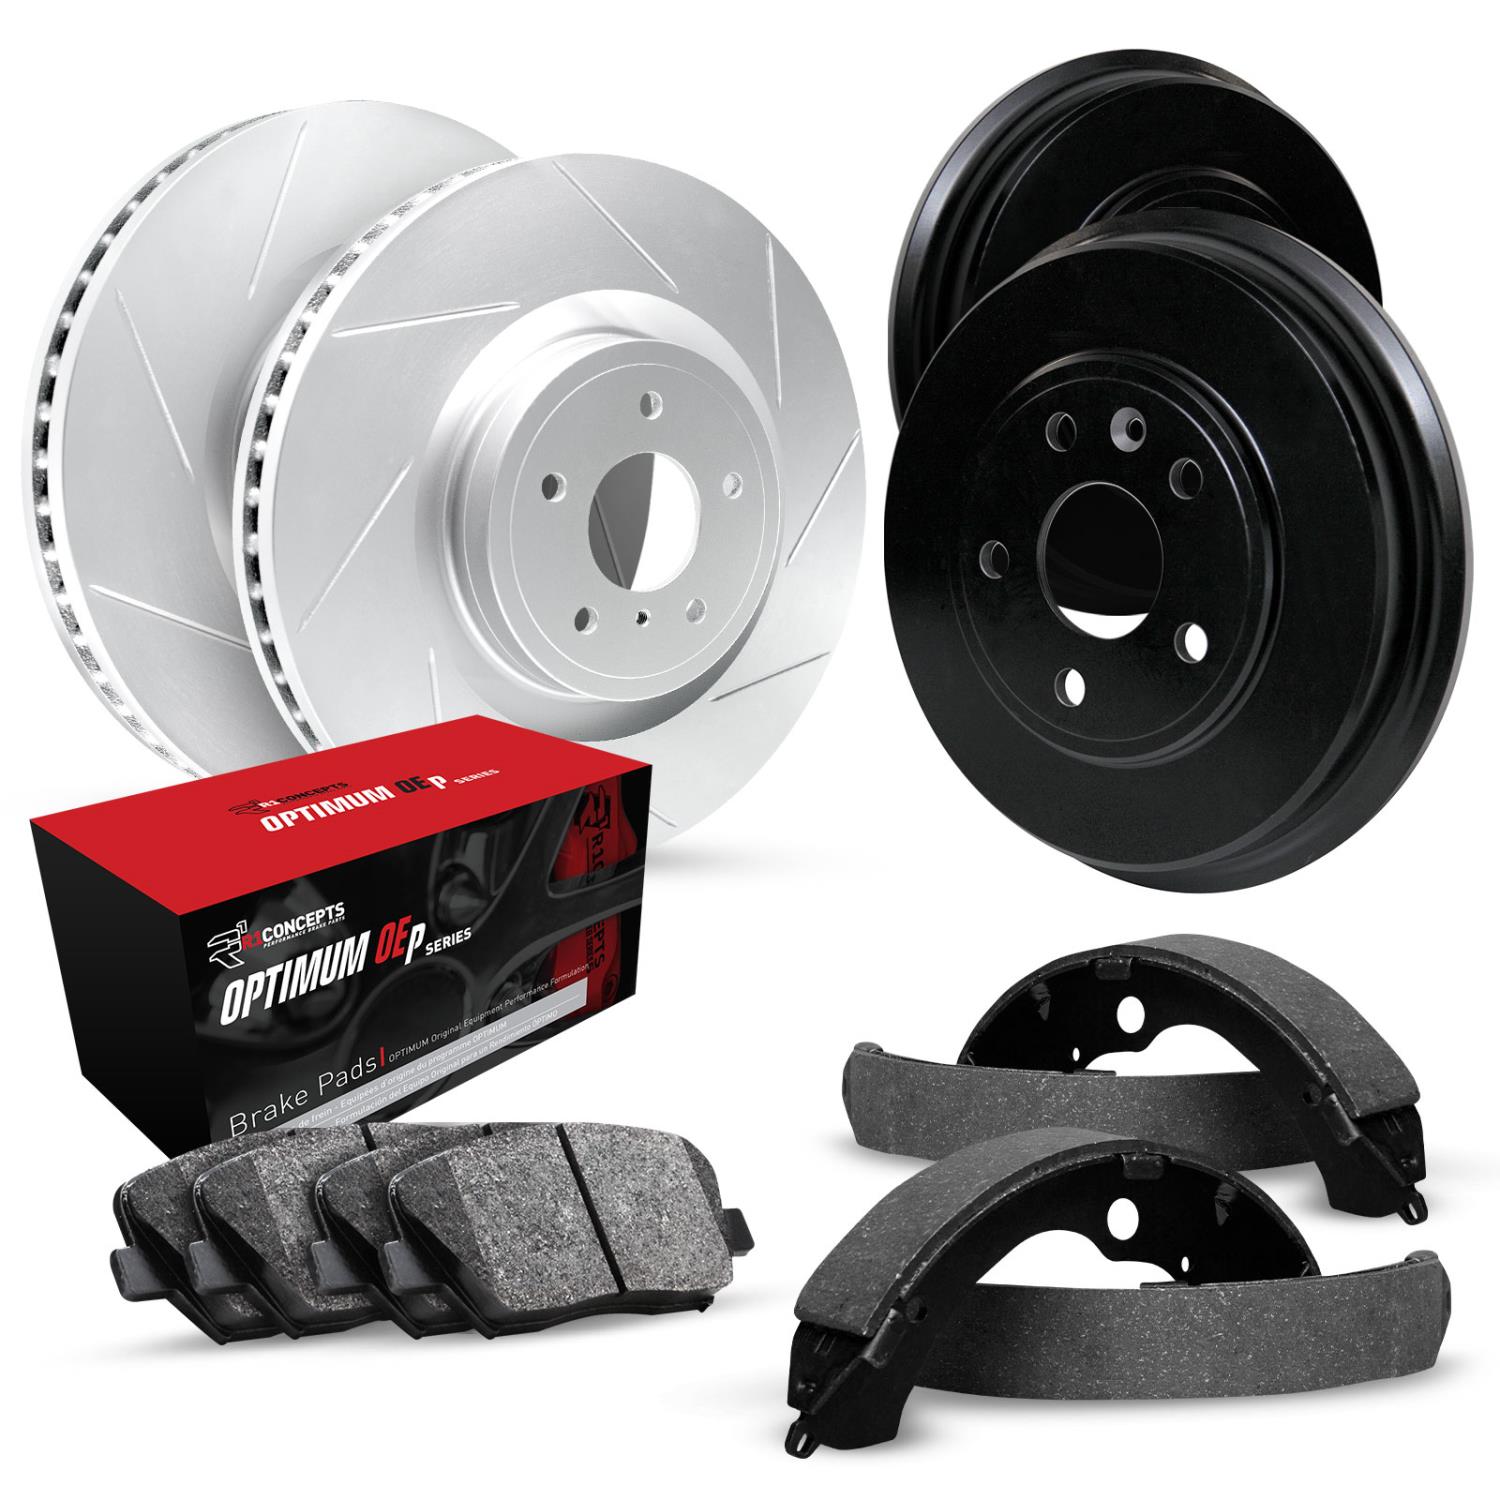 GEO-Carbon Slotted Brake Rotor & Drum Set w/Optimum OE Pads & Shoes, 2002-2004 Lexus/Toyota/Scion, Position: Front & Rear